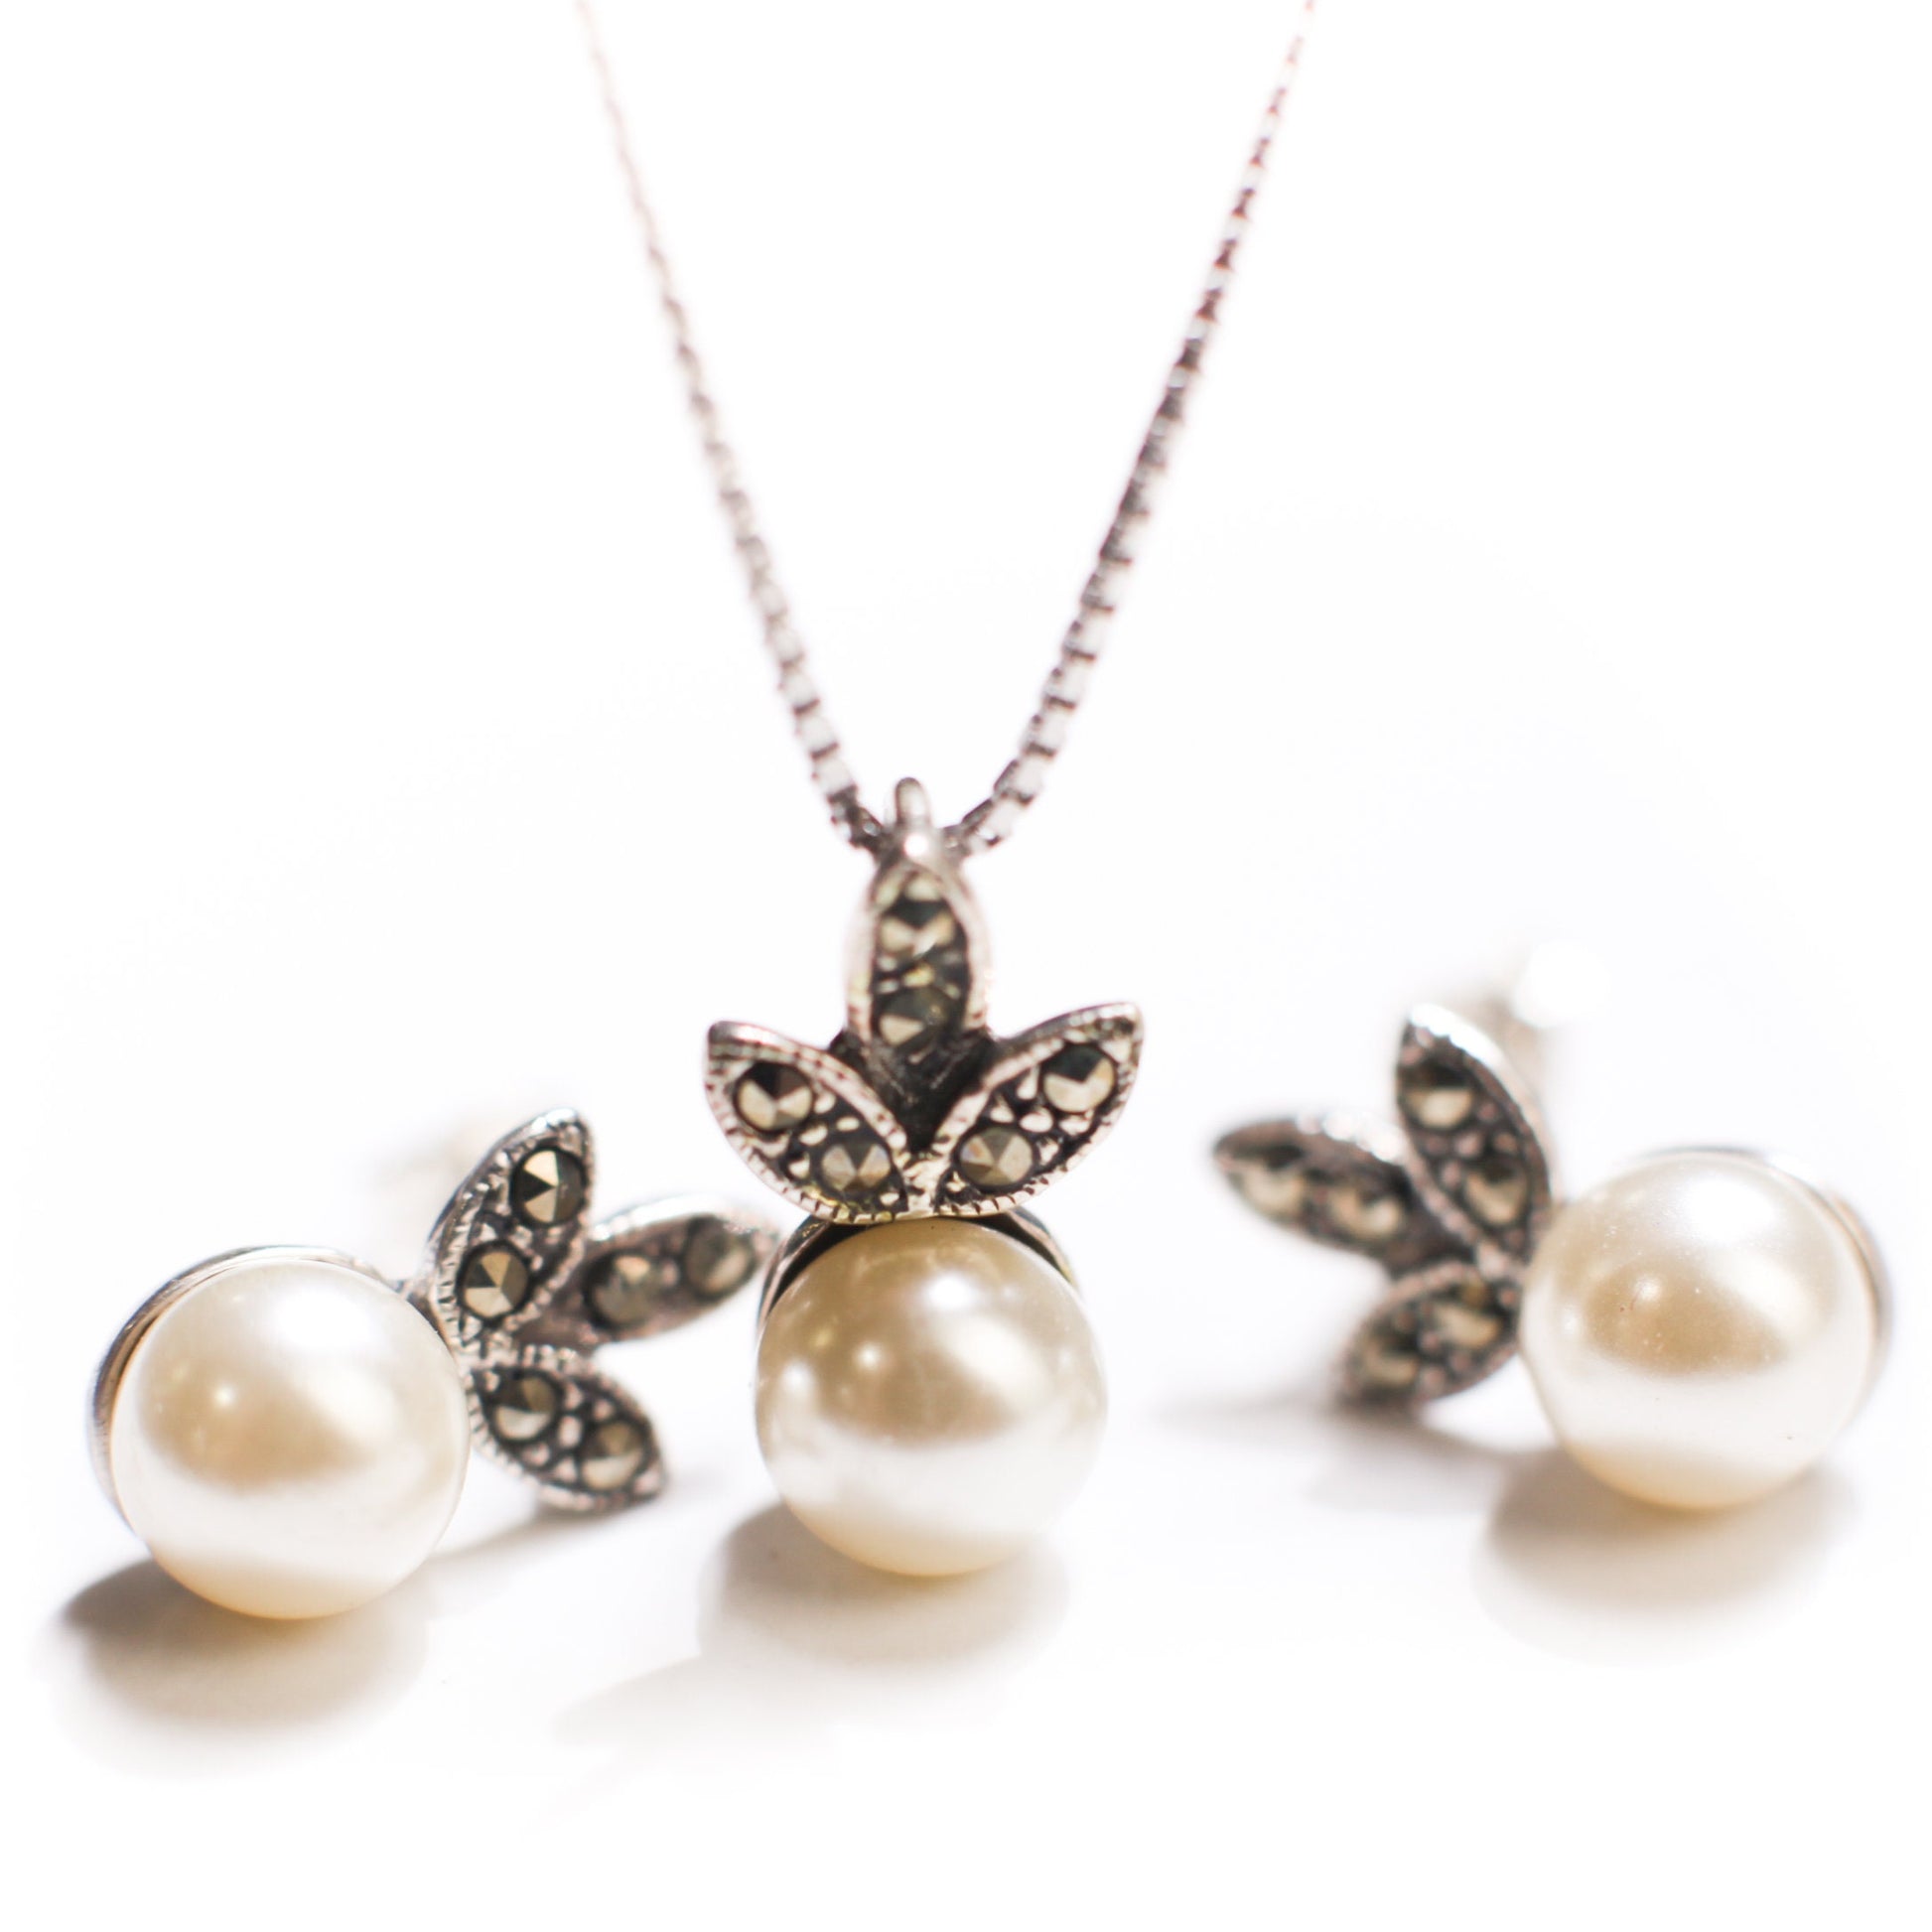 925 Sterling Silver Marcasite with Pearl 8mm Flower Post Earrings and Sterling Silver Box Chain 16" Necklace vintage Antique jewelry set.